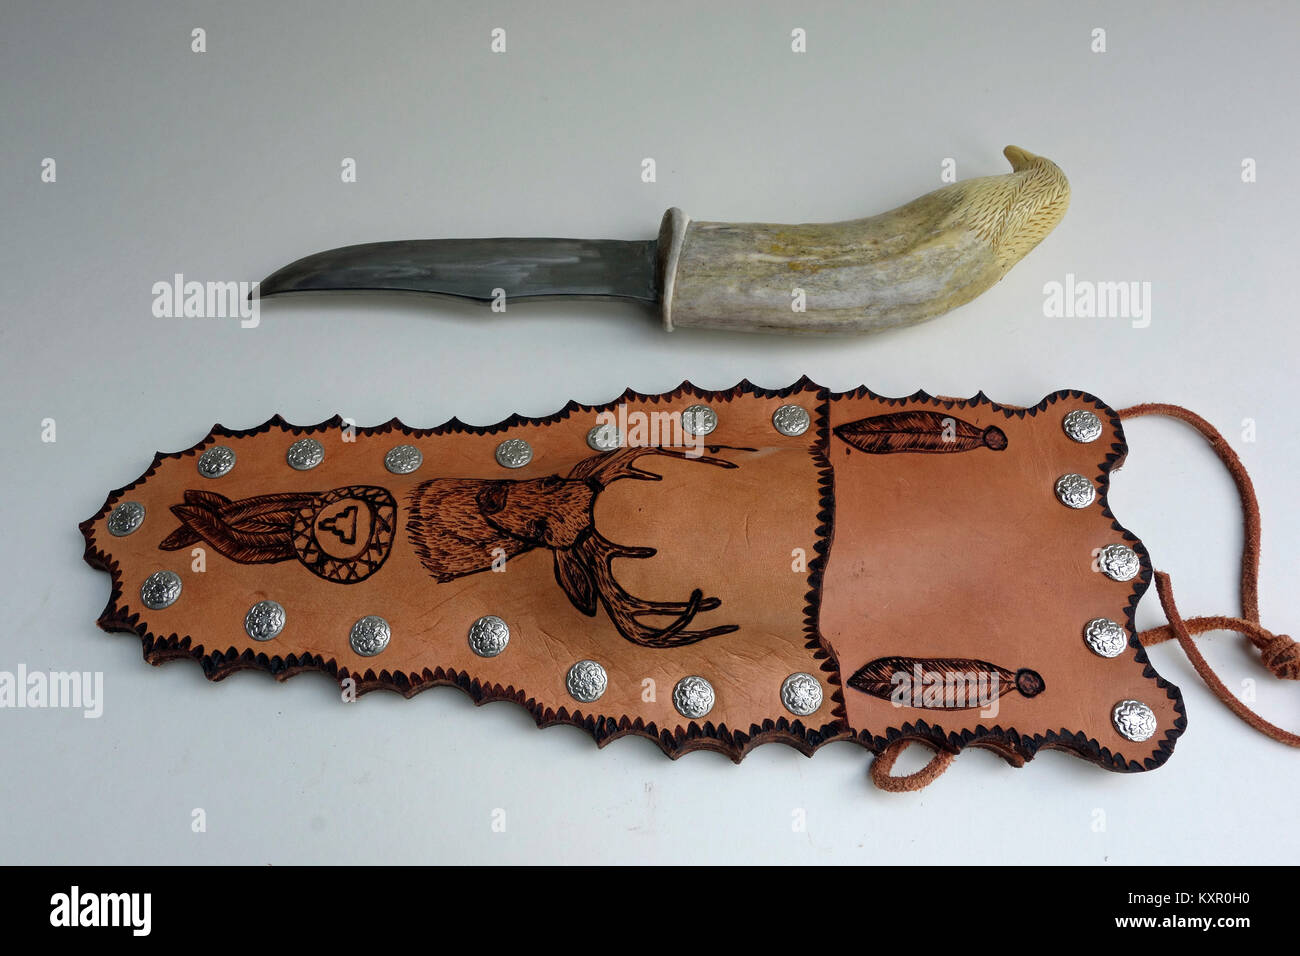 A knife made by Mi'Kmaq aboriginals in Canada Stock Photo